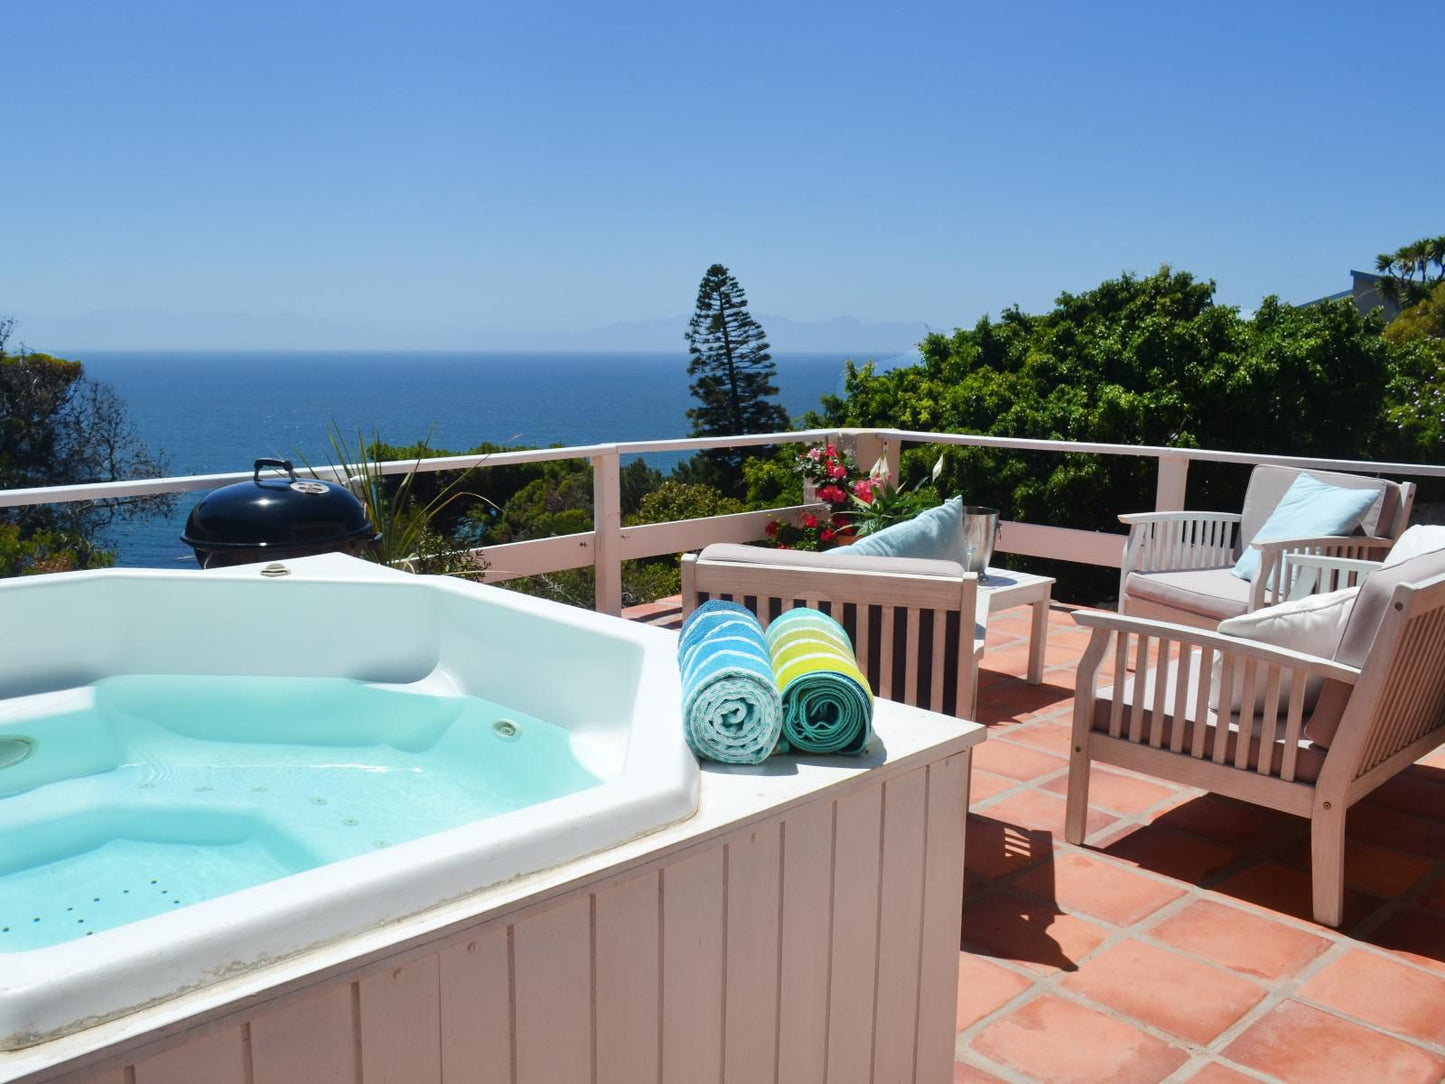 Seabreeze Luxury Two Bedroom Penthouse Froggy Farm Cape Town Western Cape South Africa Beach, Nature, Sand, Swimming Pool